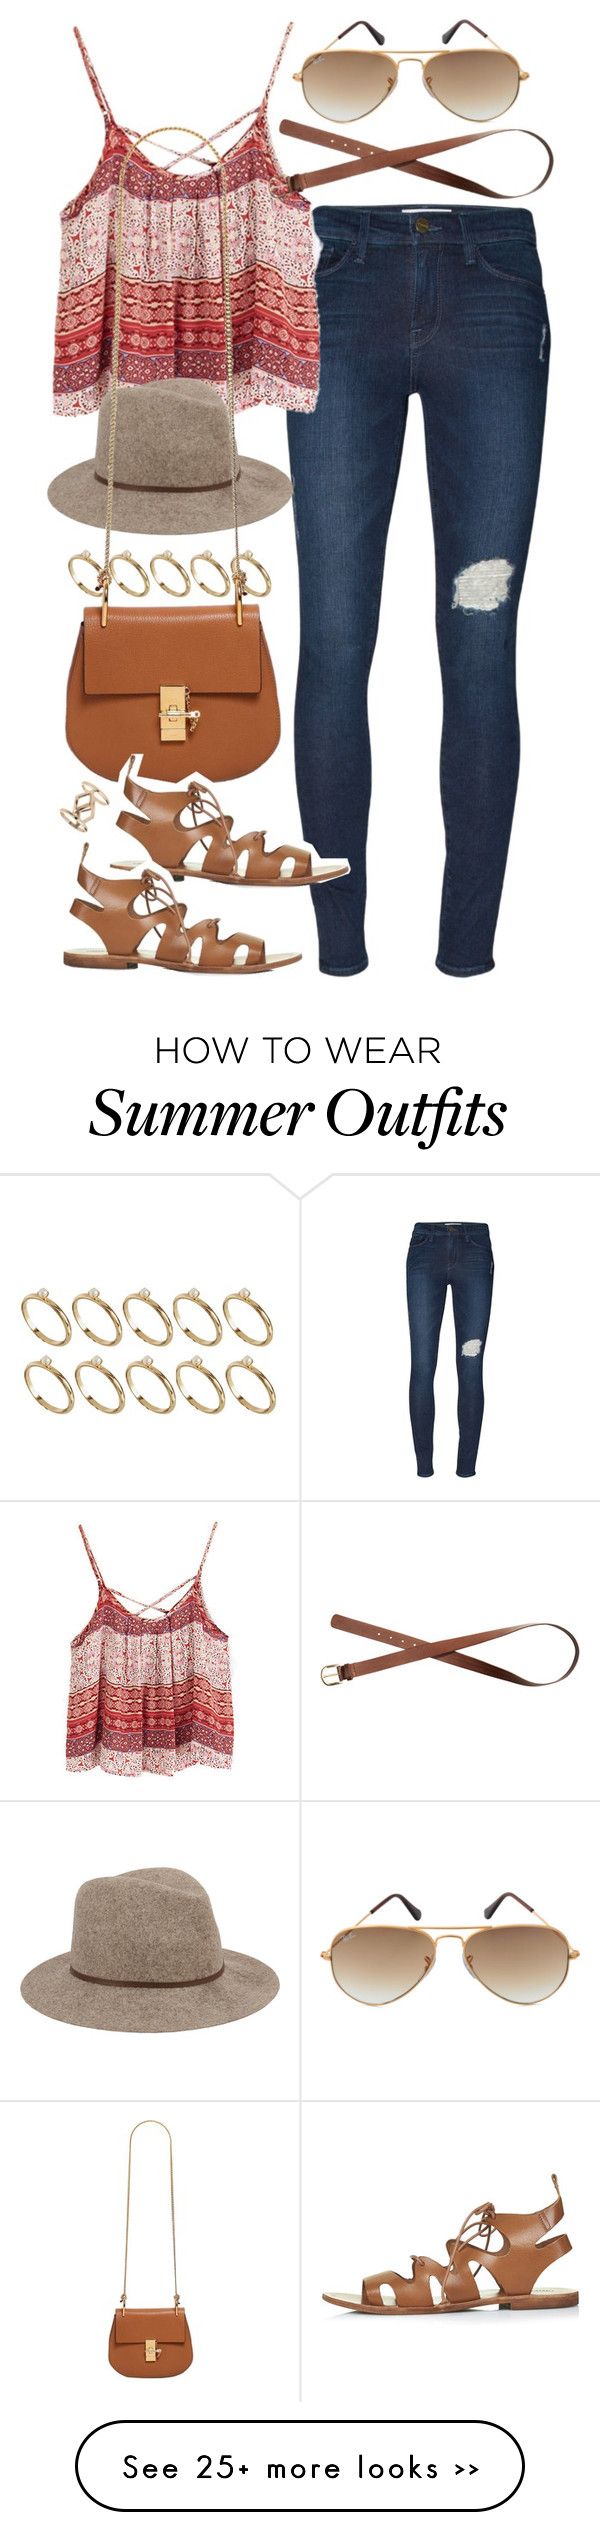 20 Polyvore Outfit Ideas for Spring 2016